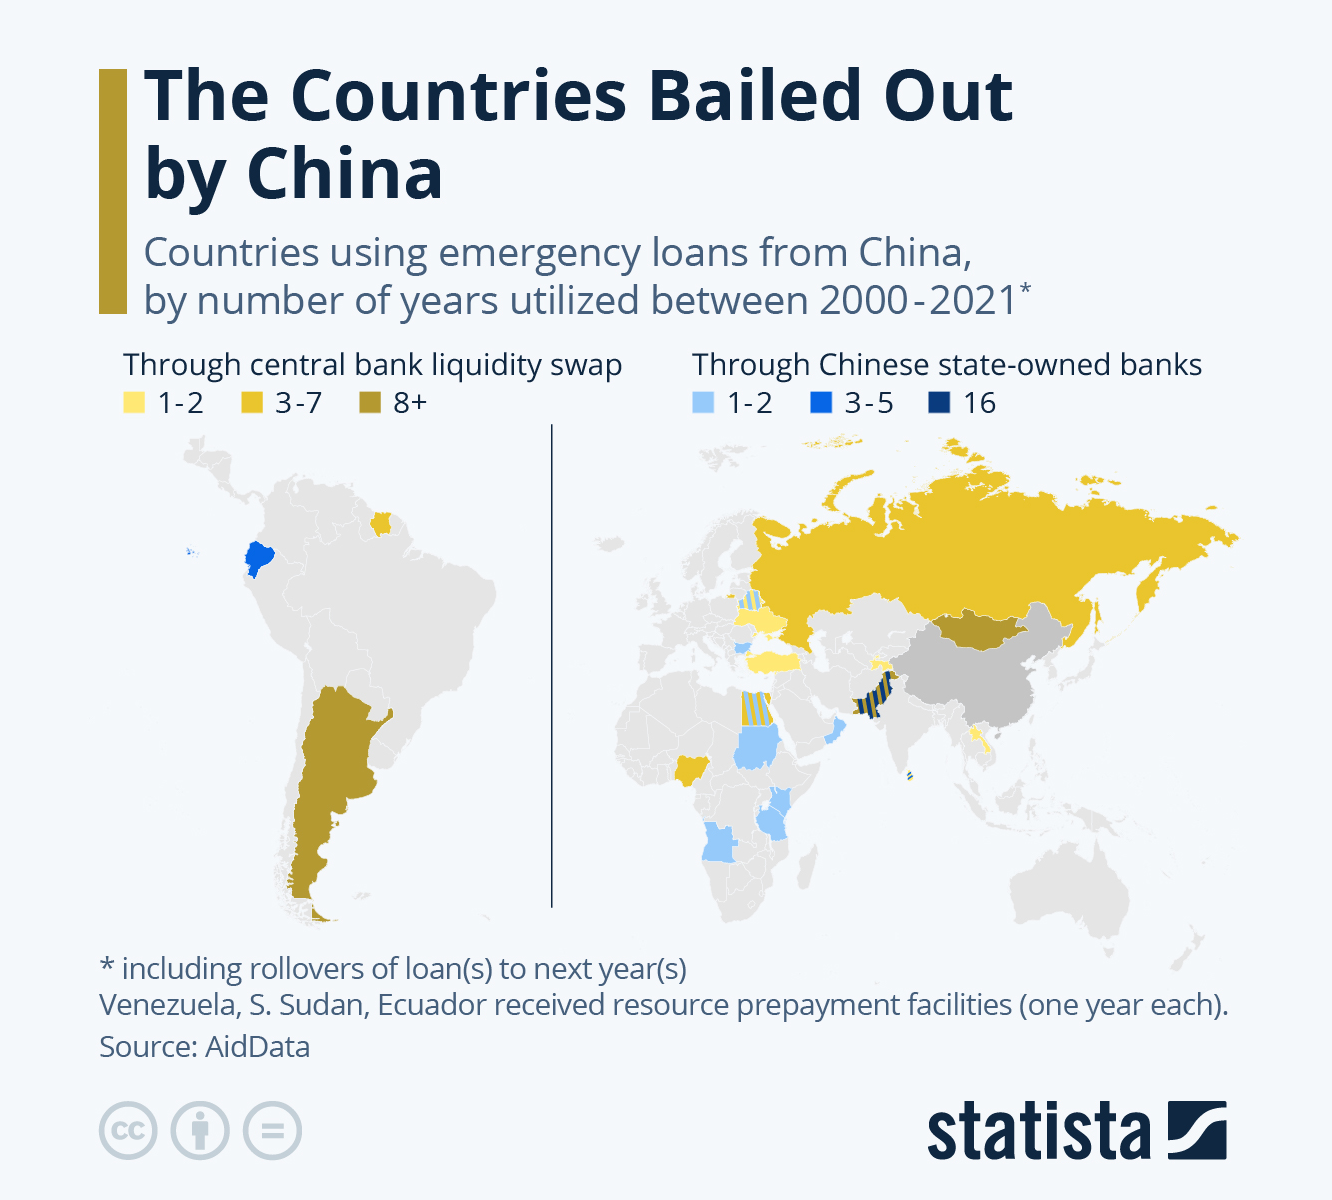 This map shows countries using emergency loans from China, by number of years utilized between 2000-2021.